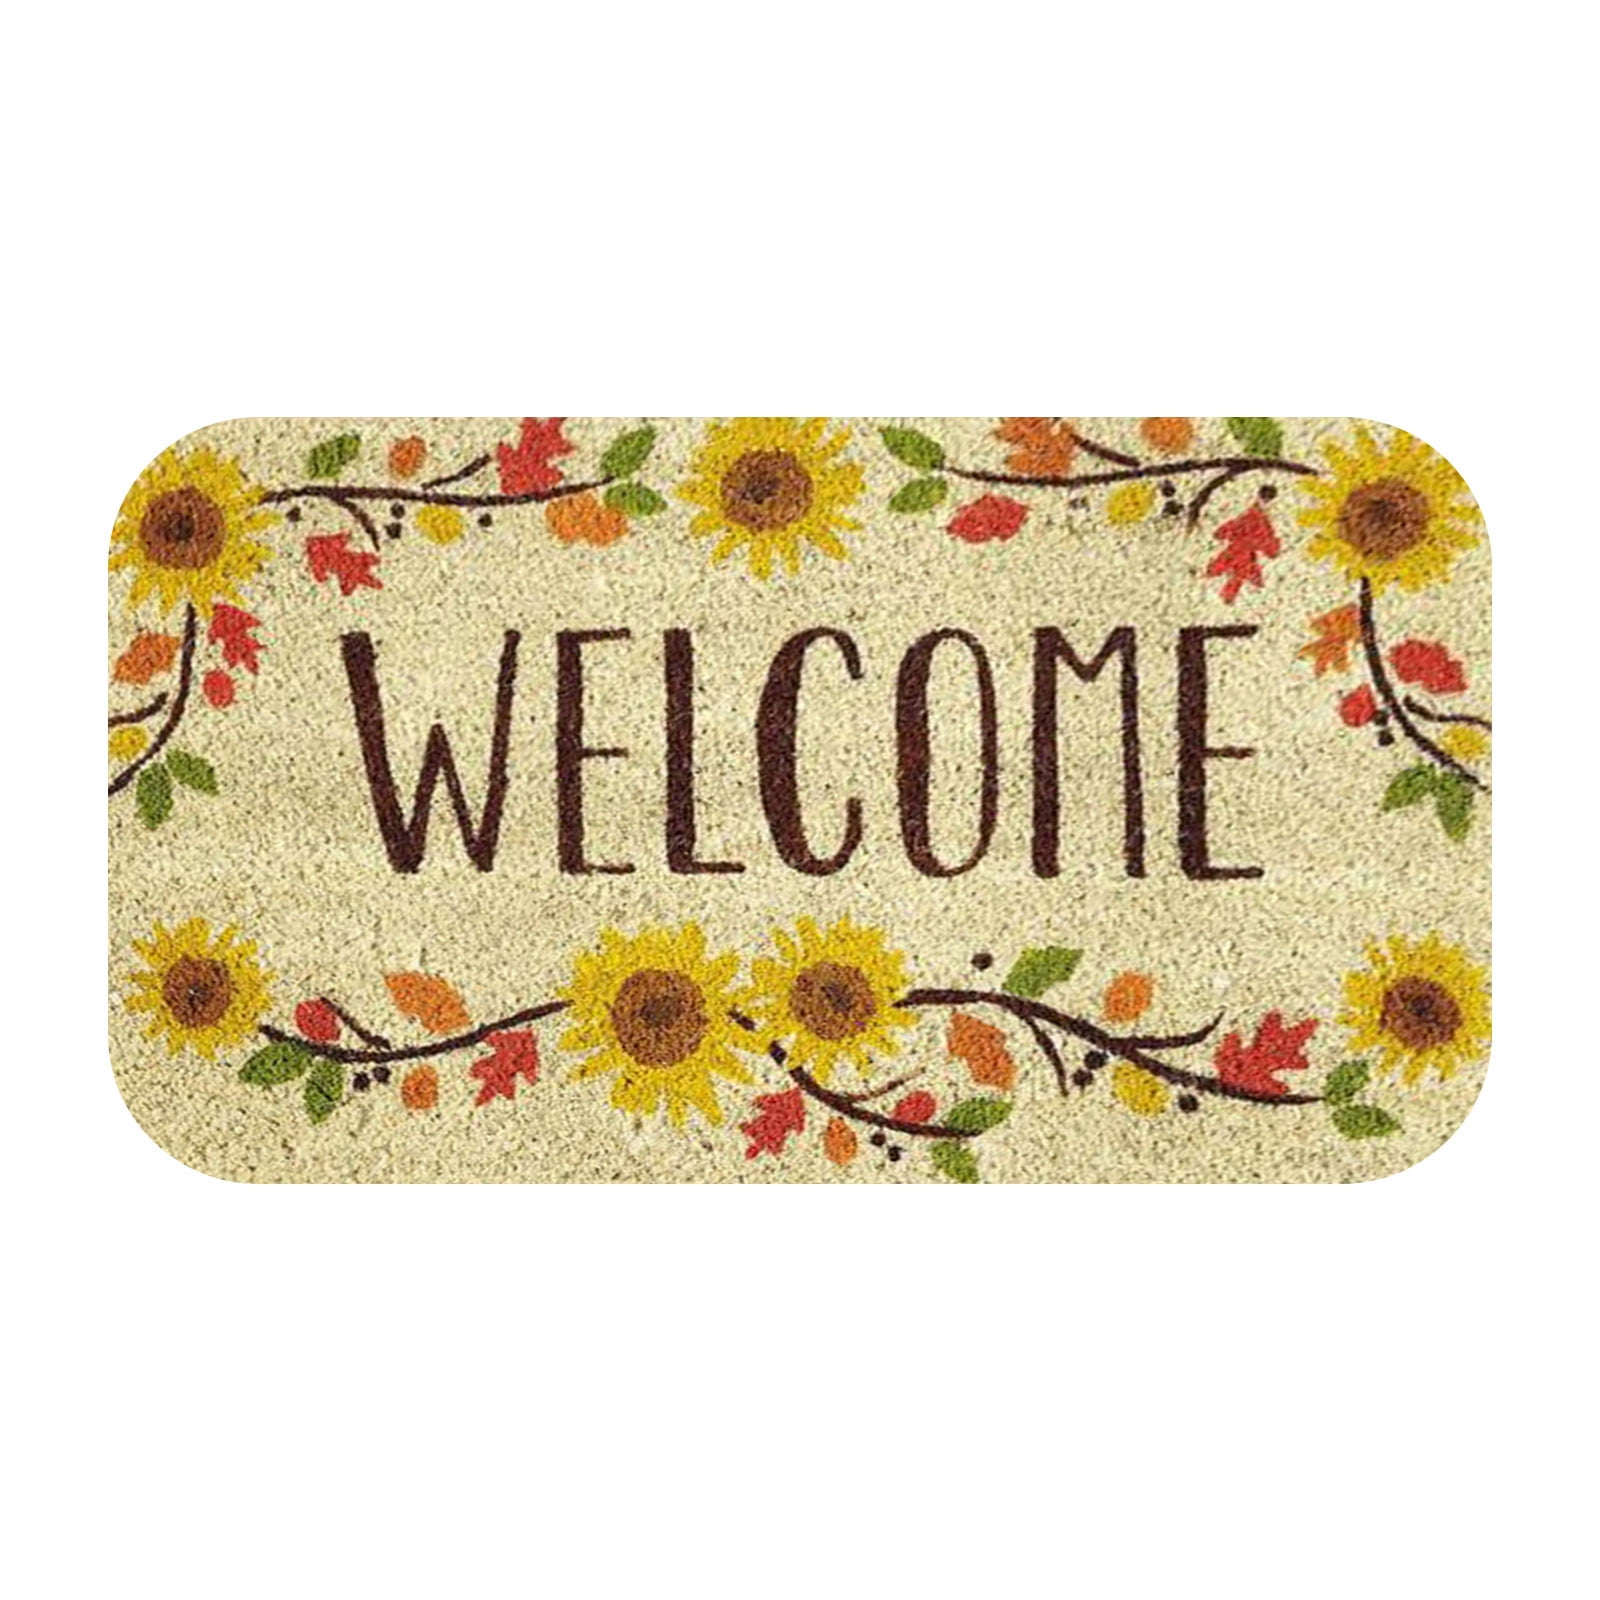 Fiddler's Elbow DOORMAT--18" X 27"--ROBIN Non-skid Rubber backed 